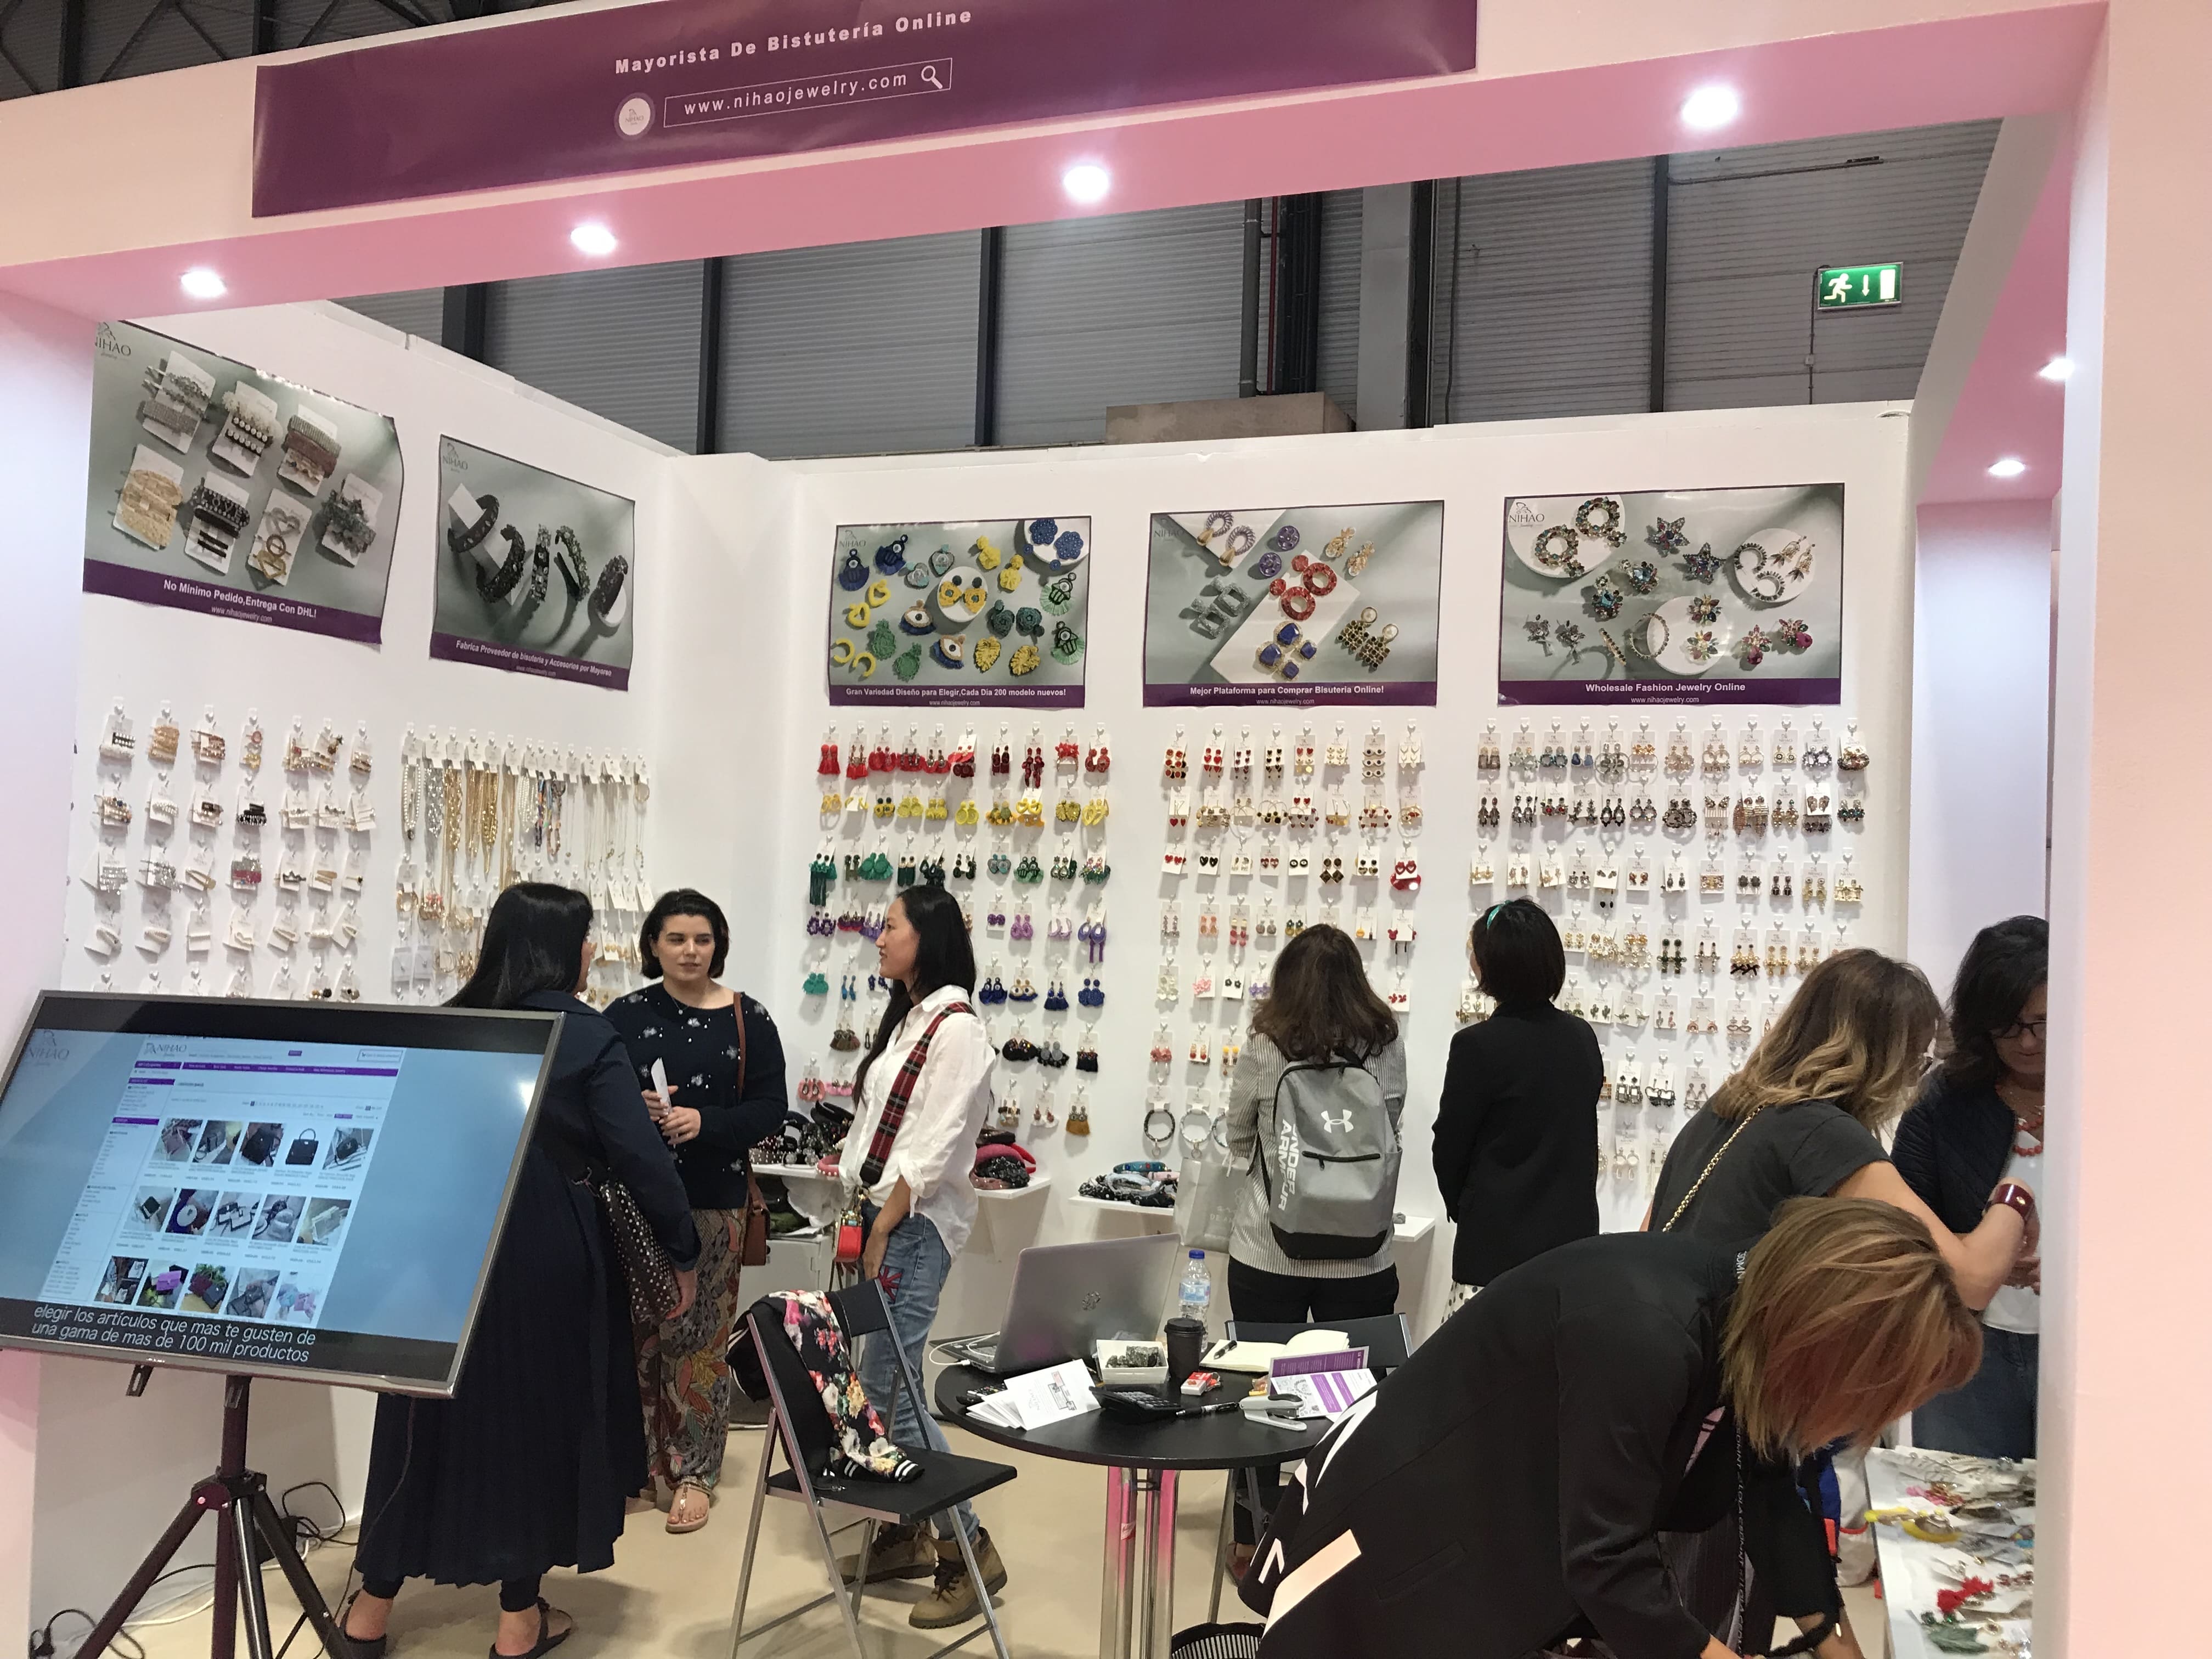 2019 Bisutex Fair in Spain, the Nihaojewelry booth﻿